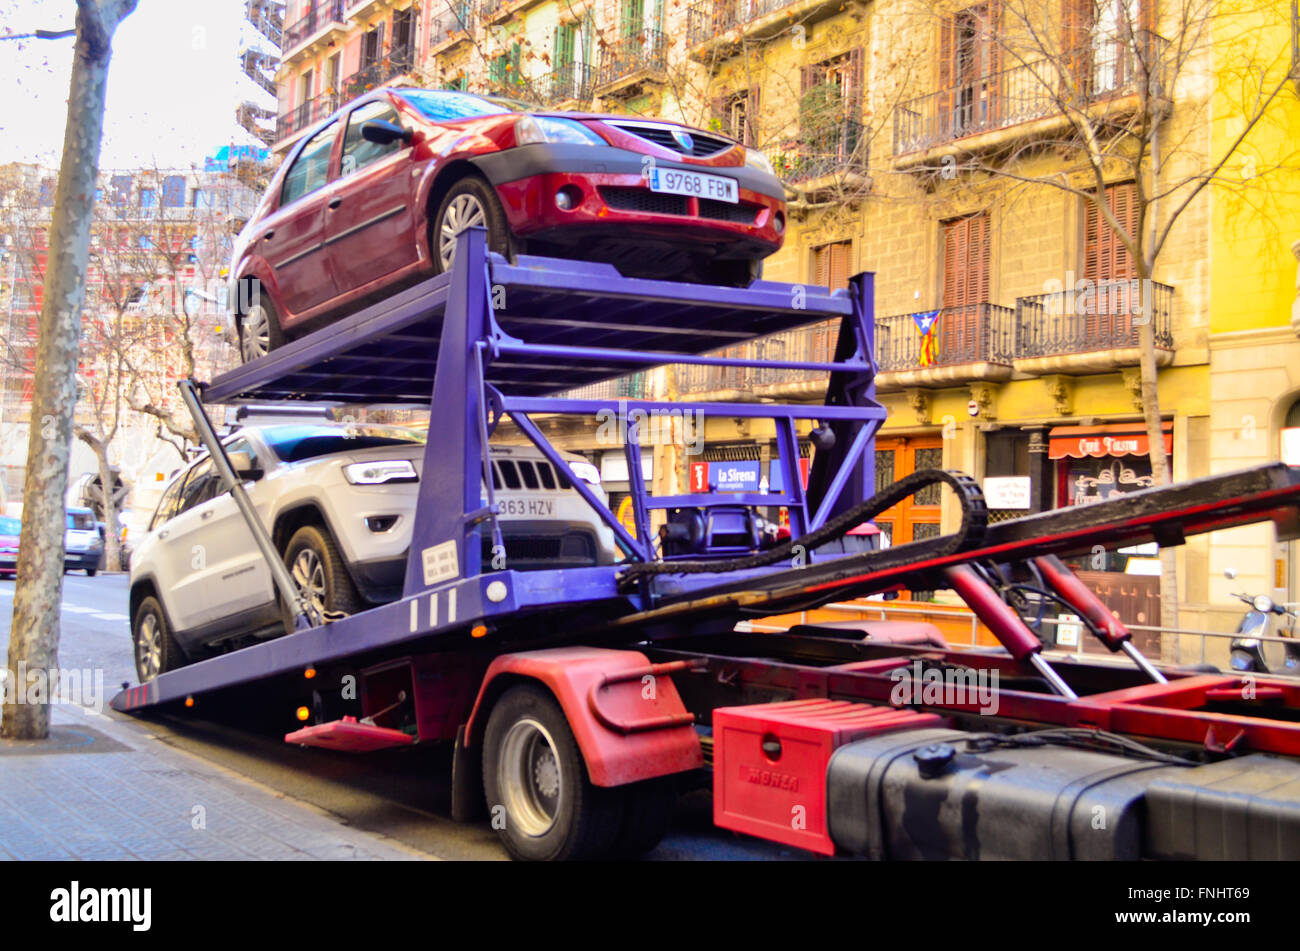 Red car carrier truck with two cars ready to download. Barcelona, Catalonia, Spain. Stock Photo